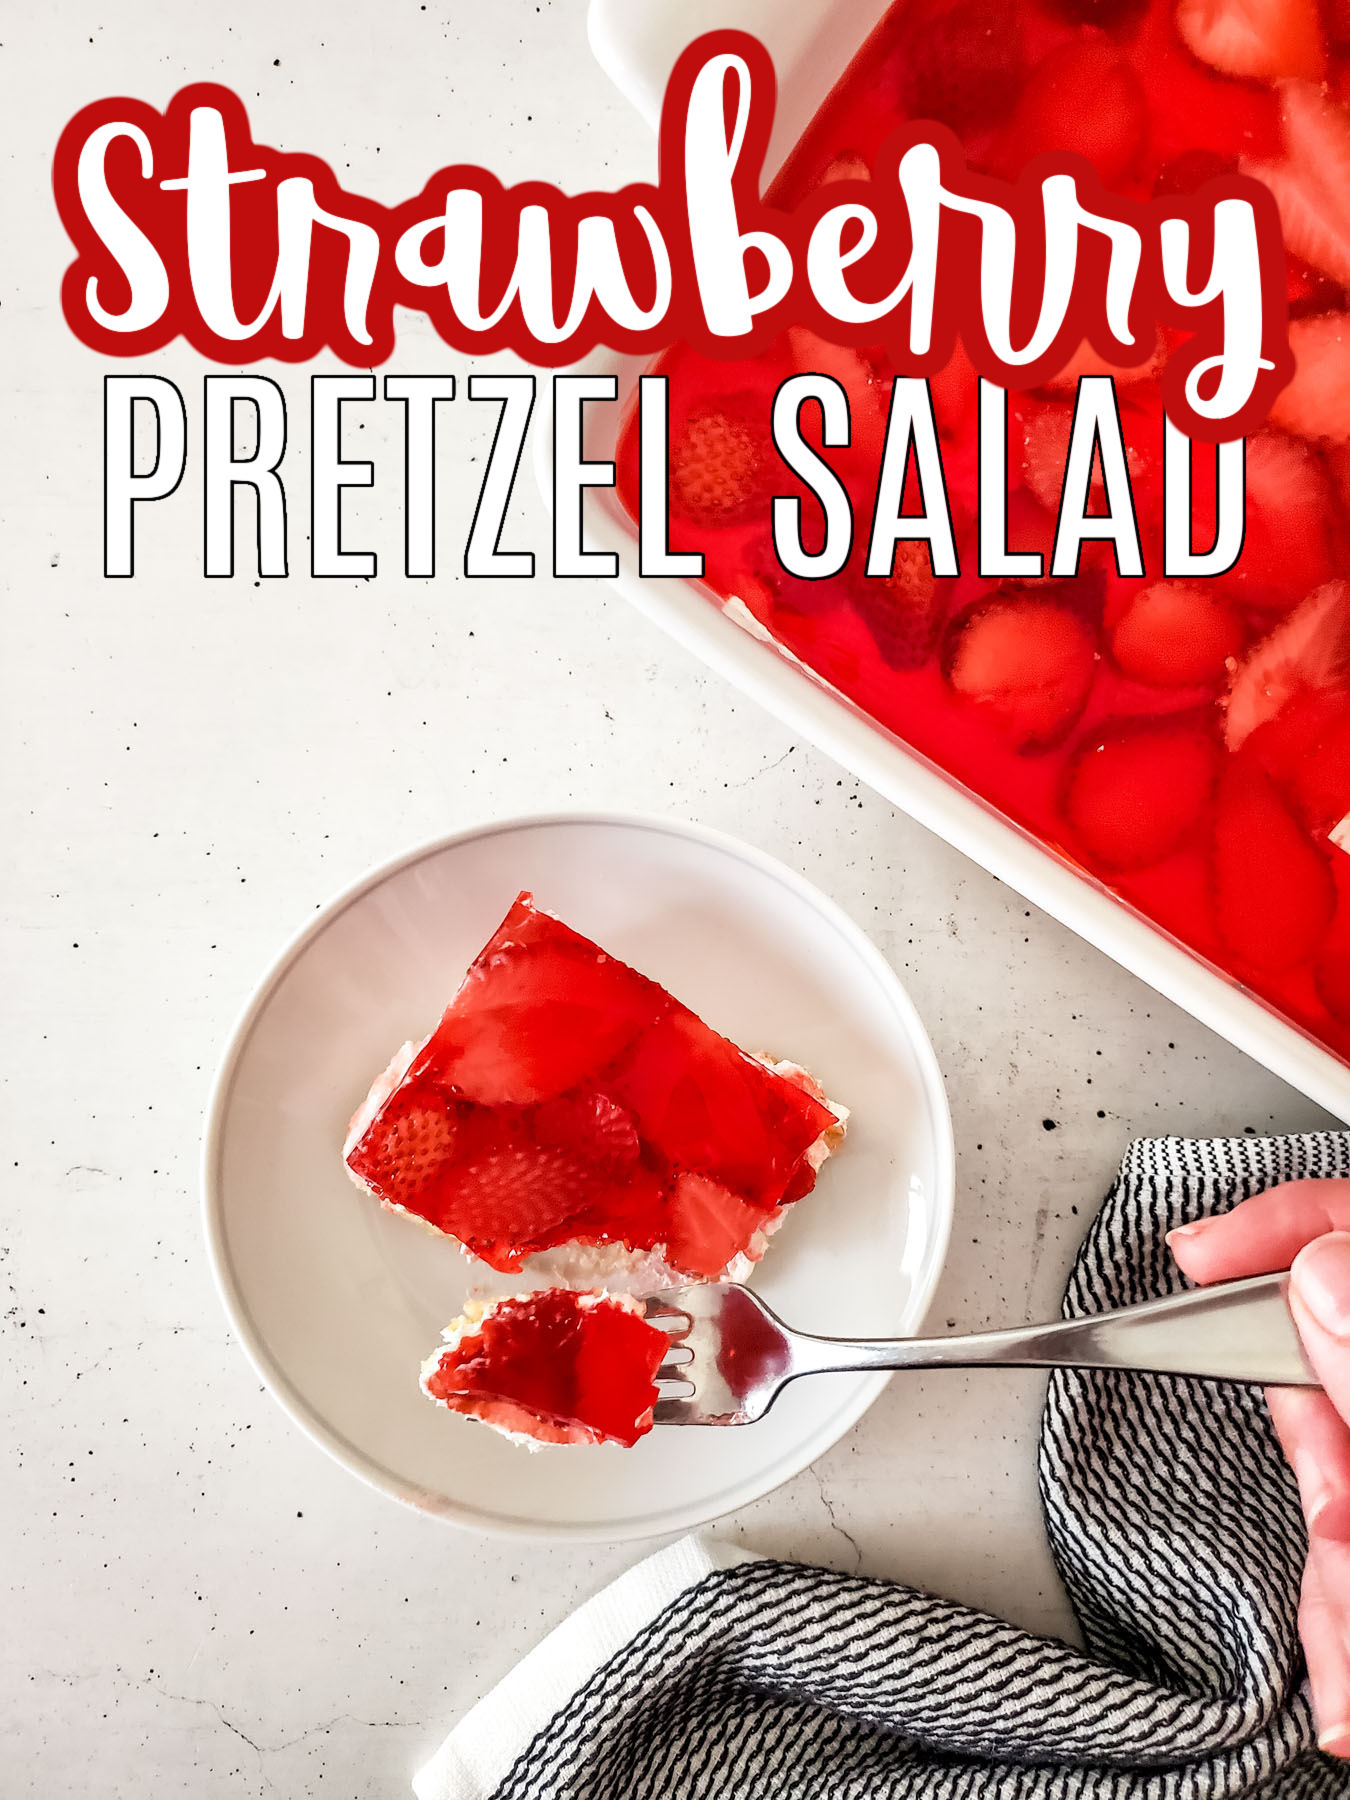 A cut piece of Strawberry Pretzel Salad on a white plate with leftovers in a white casserole pan.